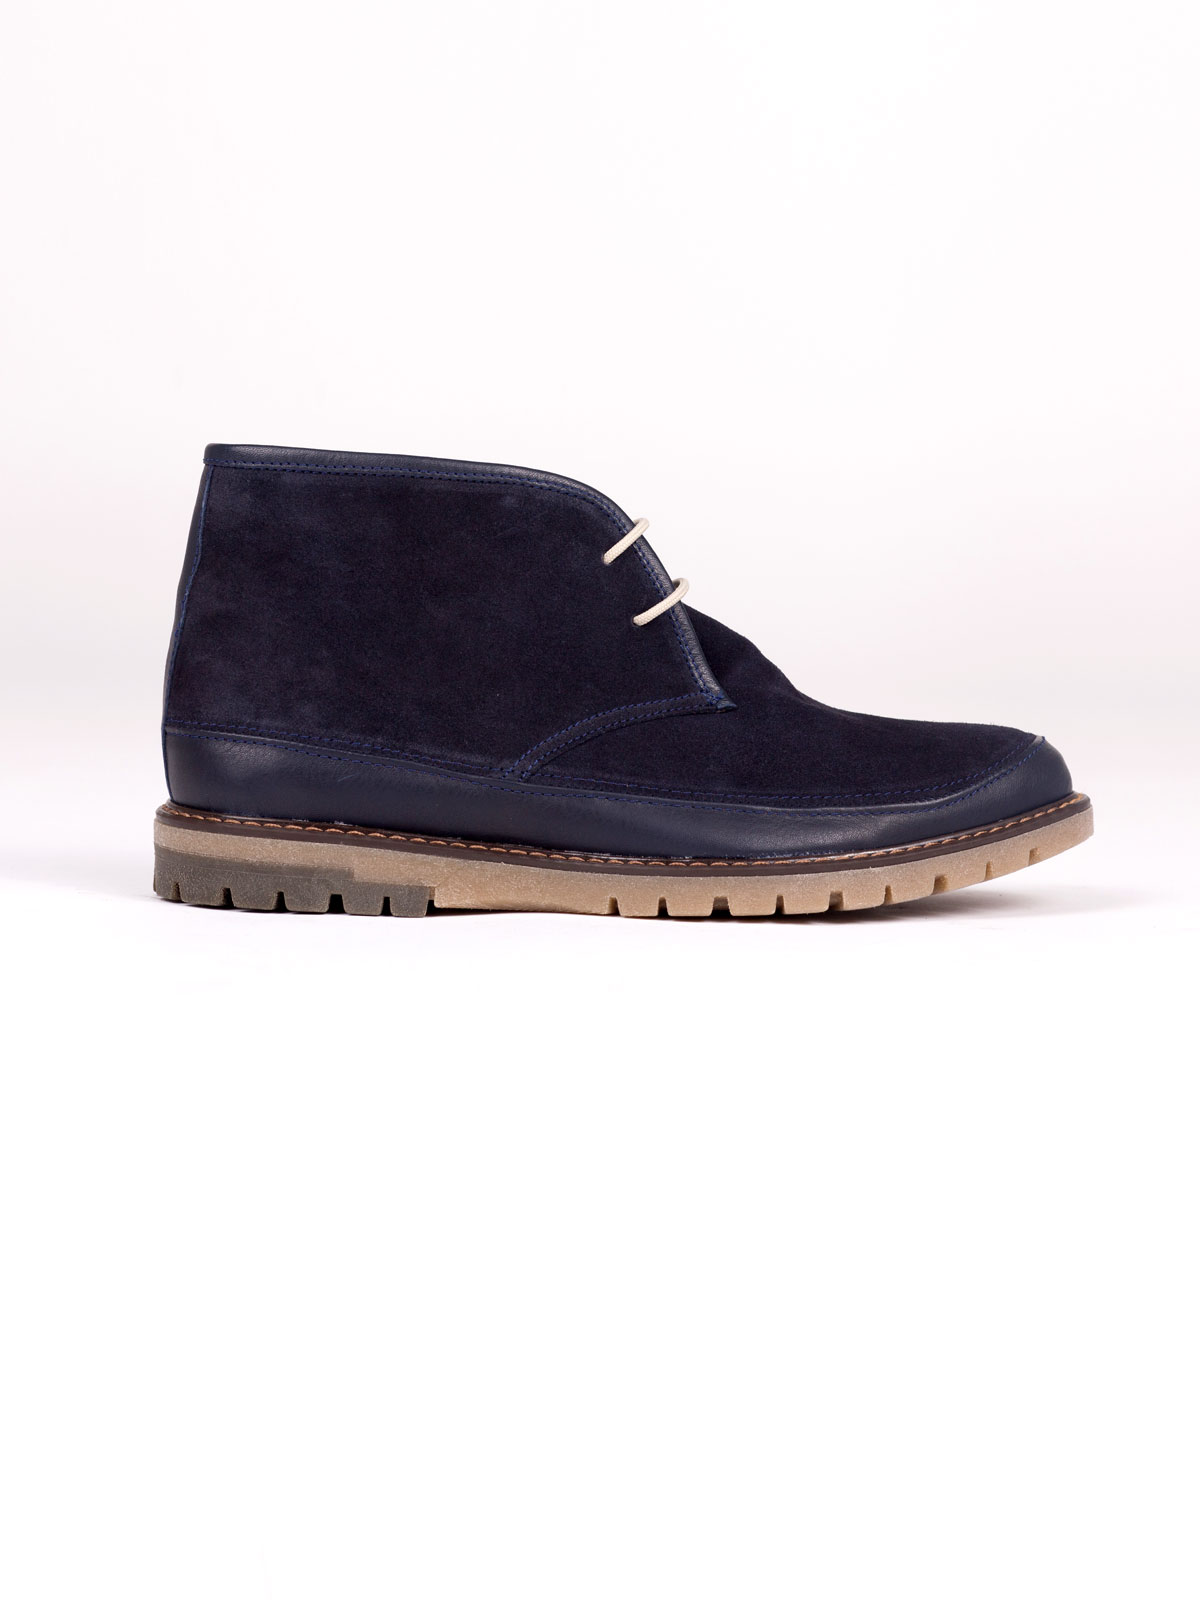 Sports leather boots with suede finish - 81045 - € 41.62 img3